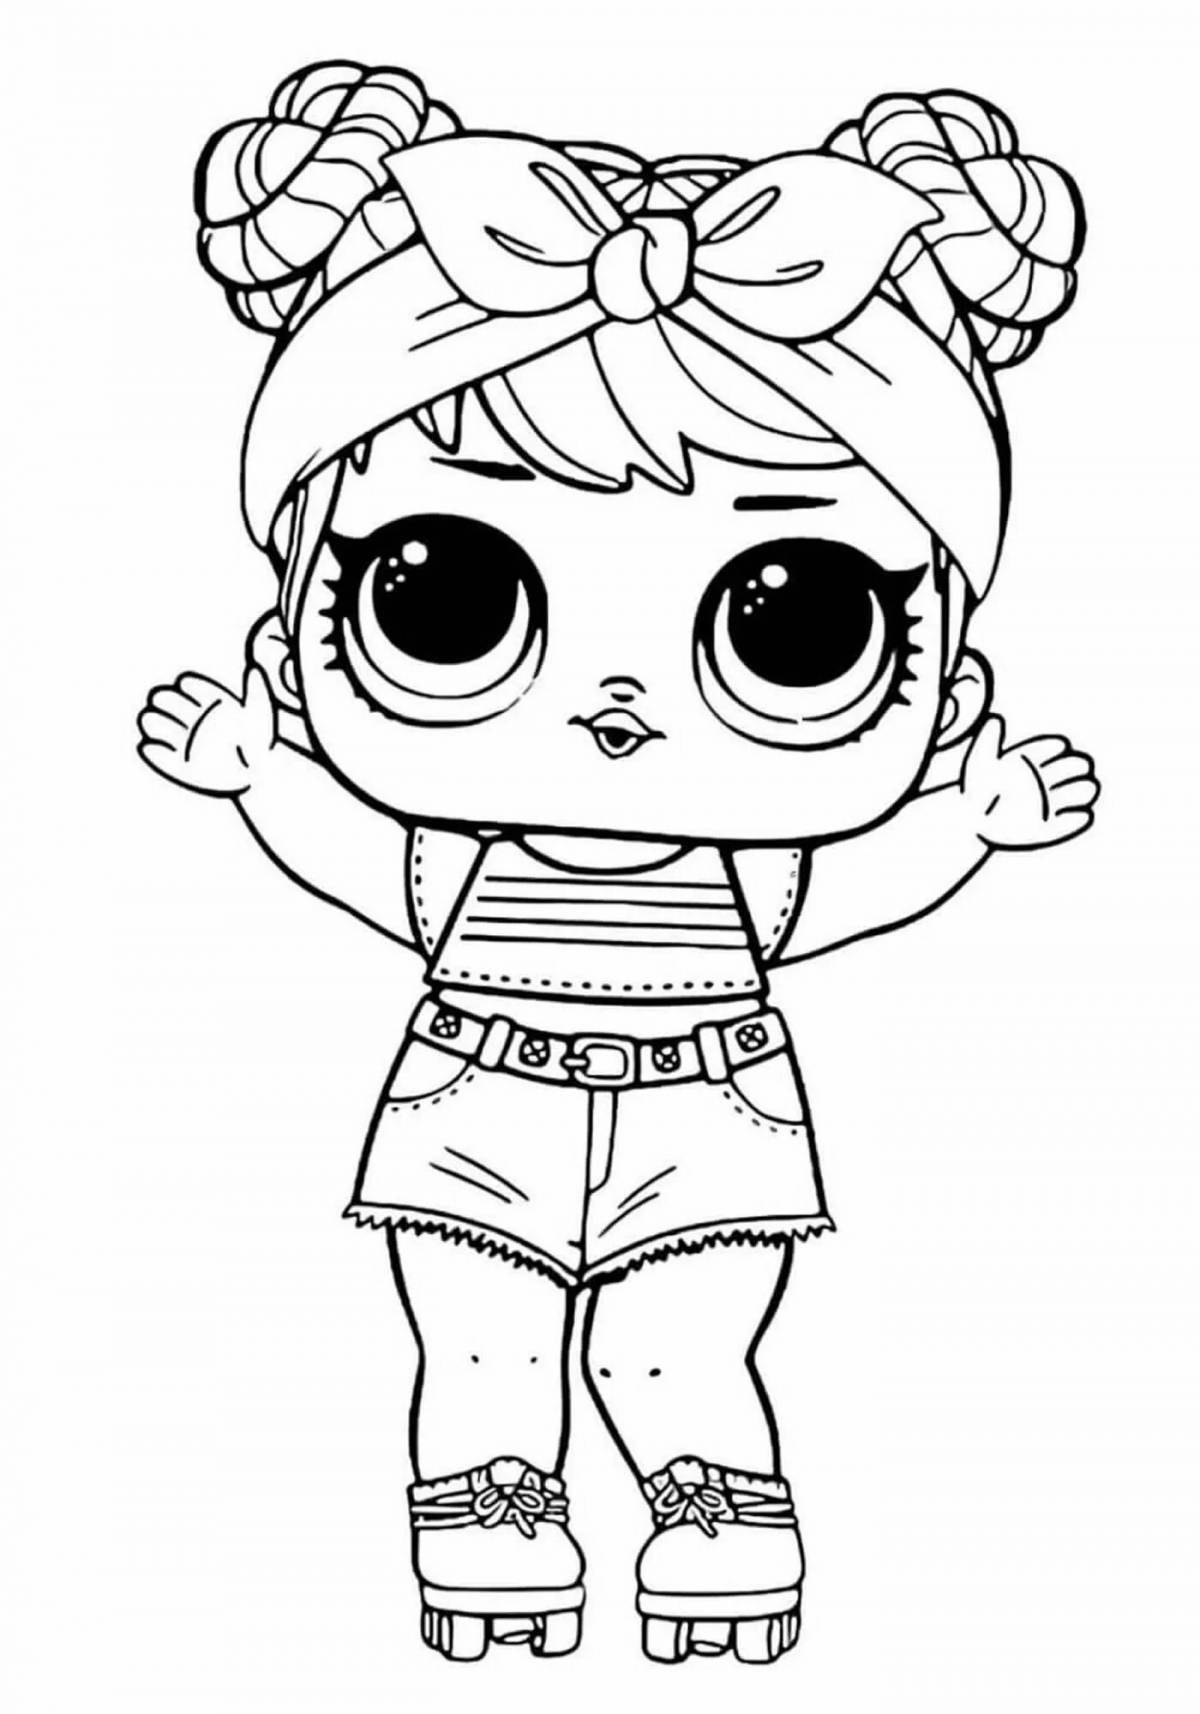 Happy coloring page baby dolls lol